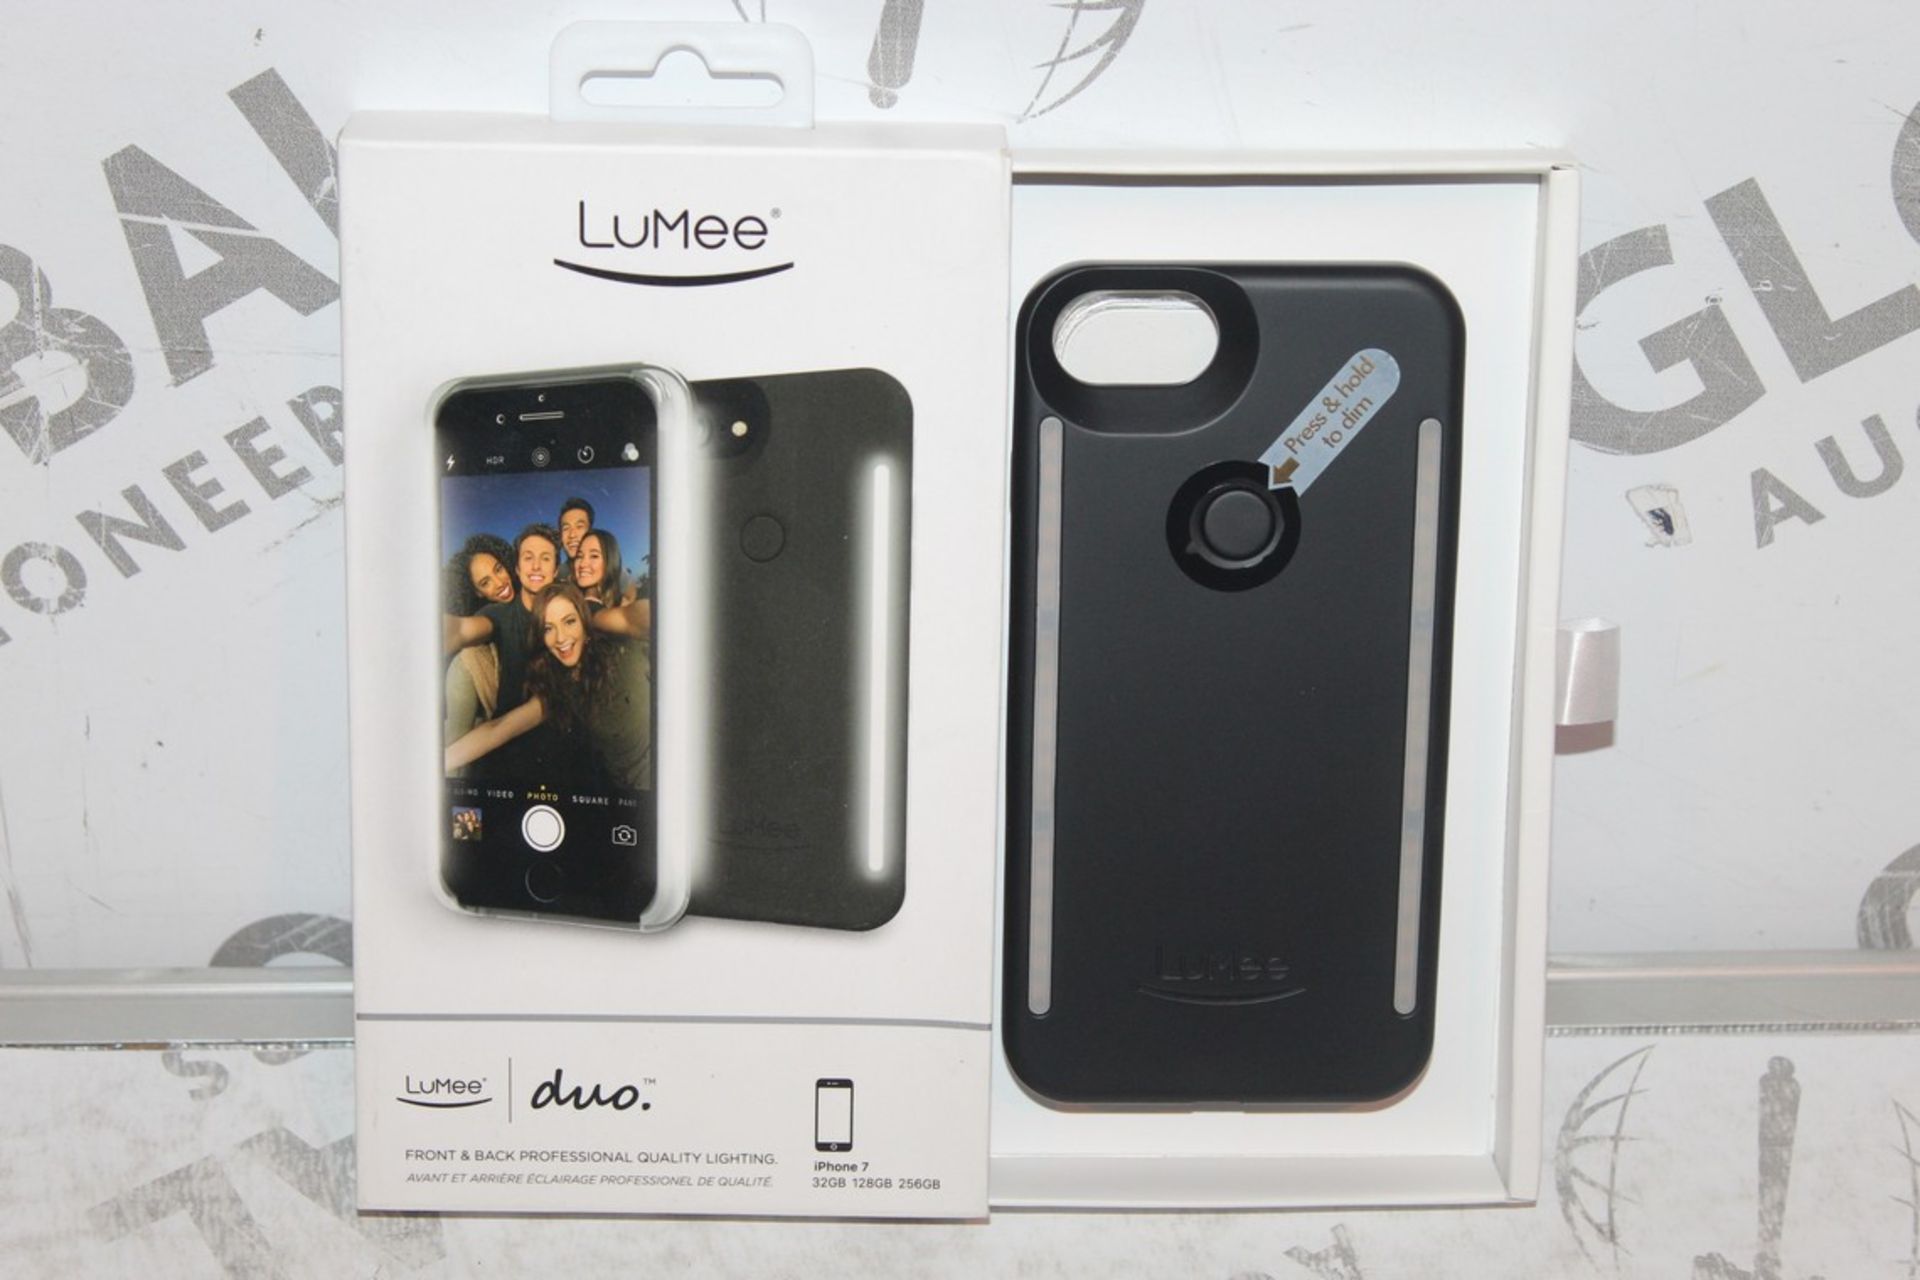 Lot to Contain 2 Brand New Iphone 7 Lumee Phone Cases with Perfect Lighting Solution For The Perfect